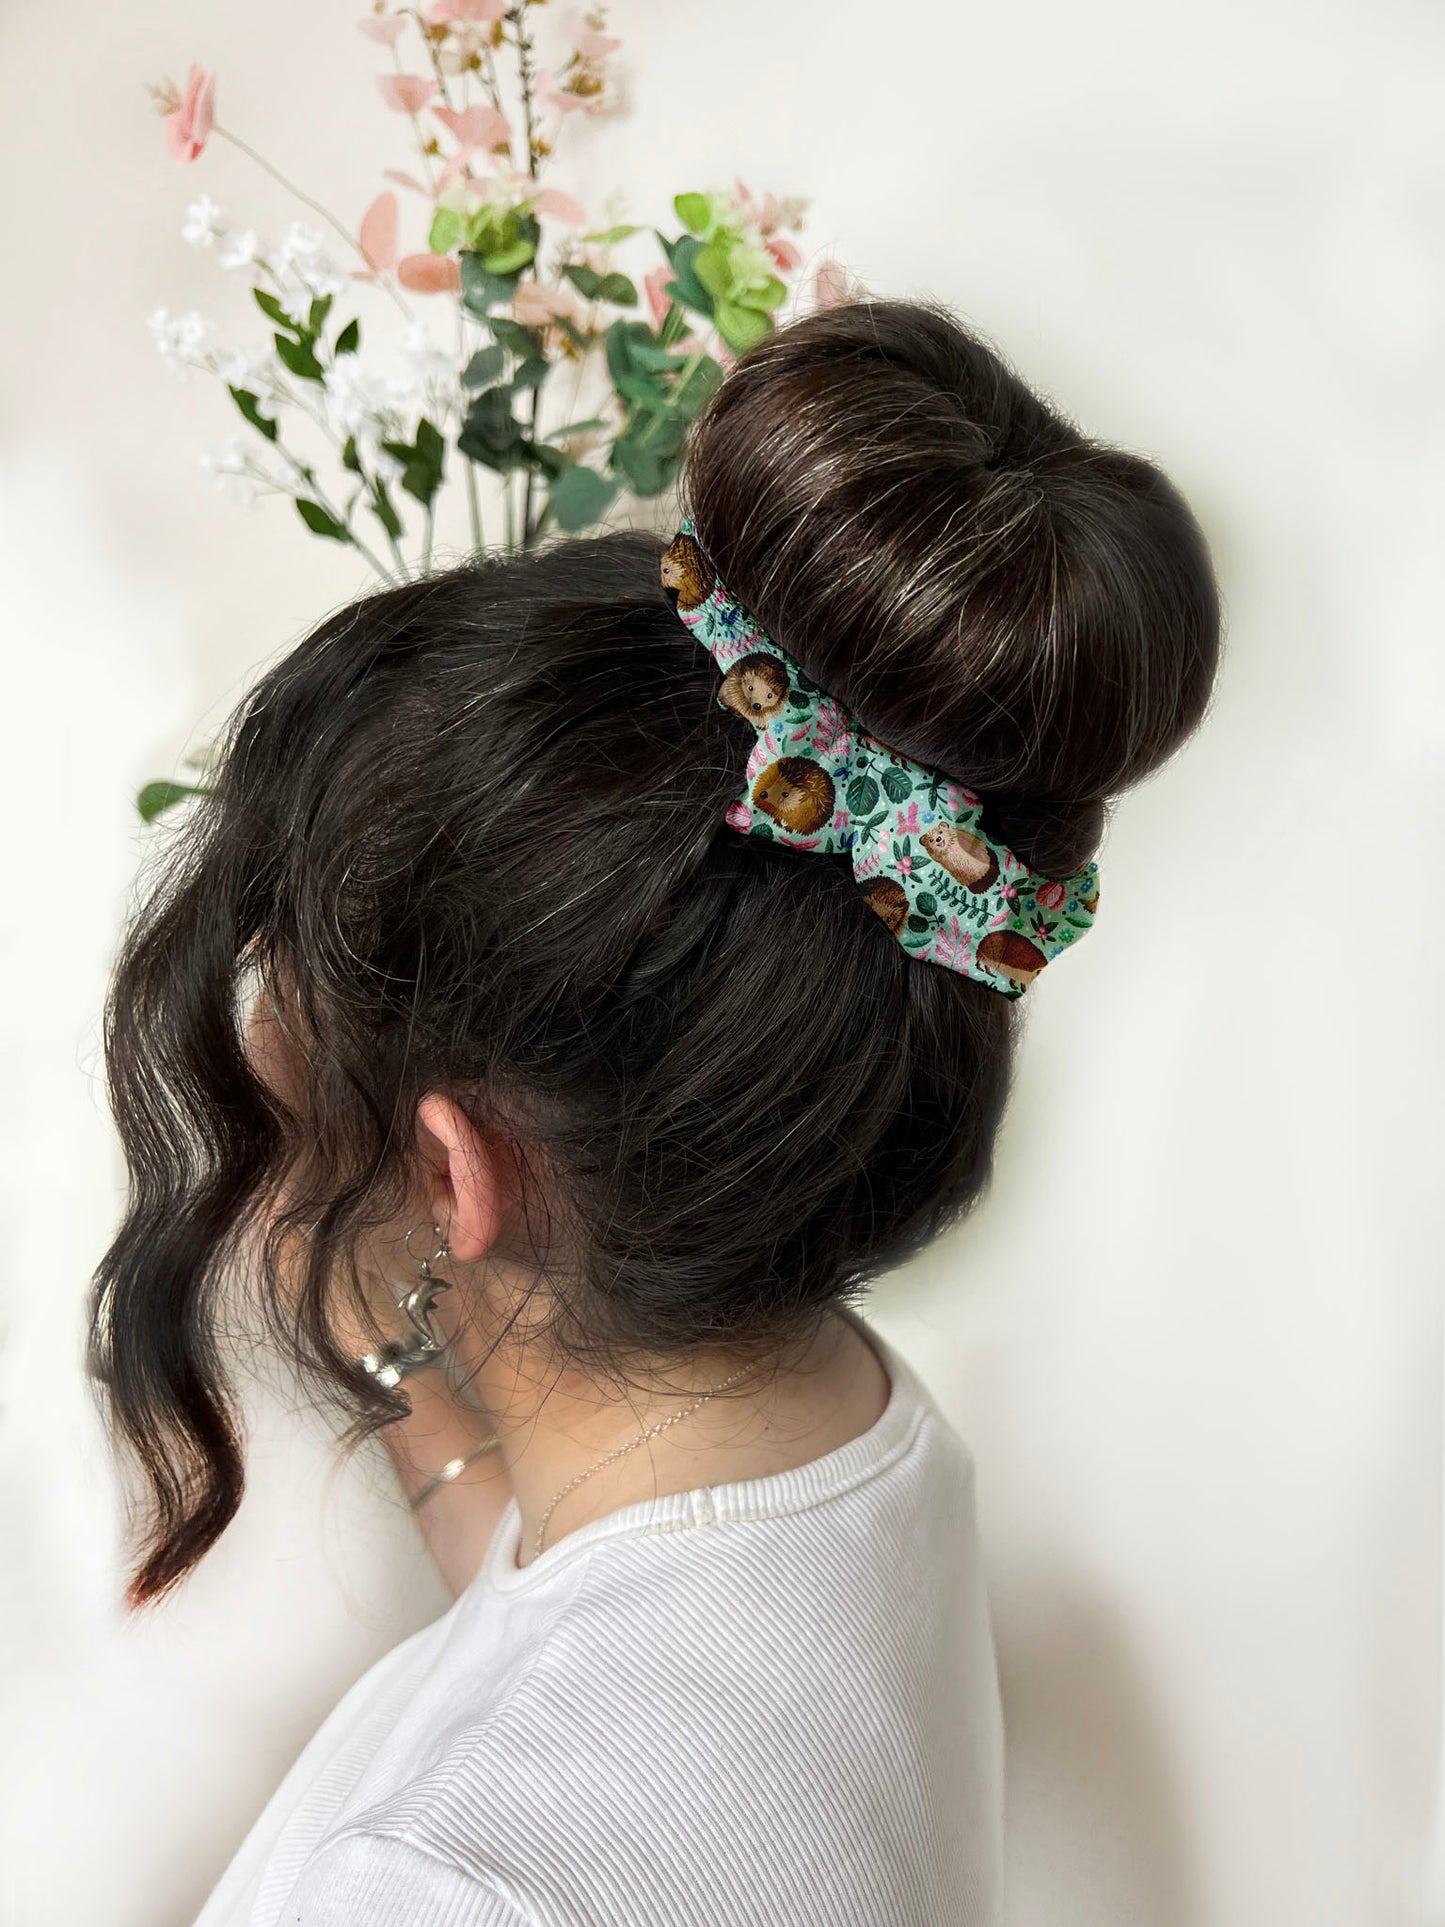 Dark haired girl wears scrunchie around a high bun. The scrunchie is green and has a hedgehog pattern on it.